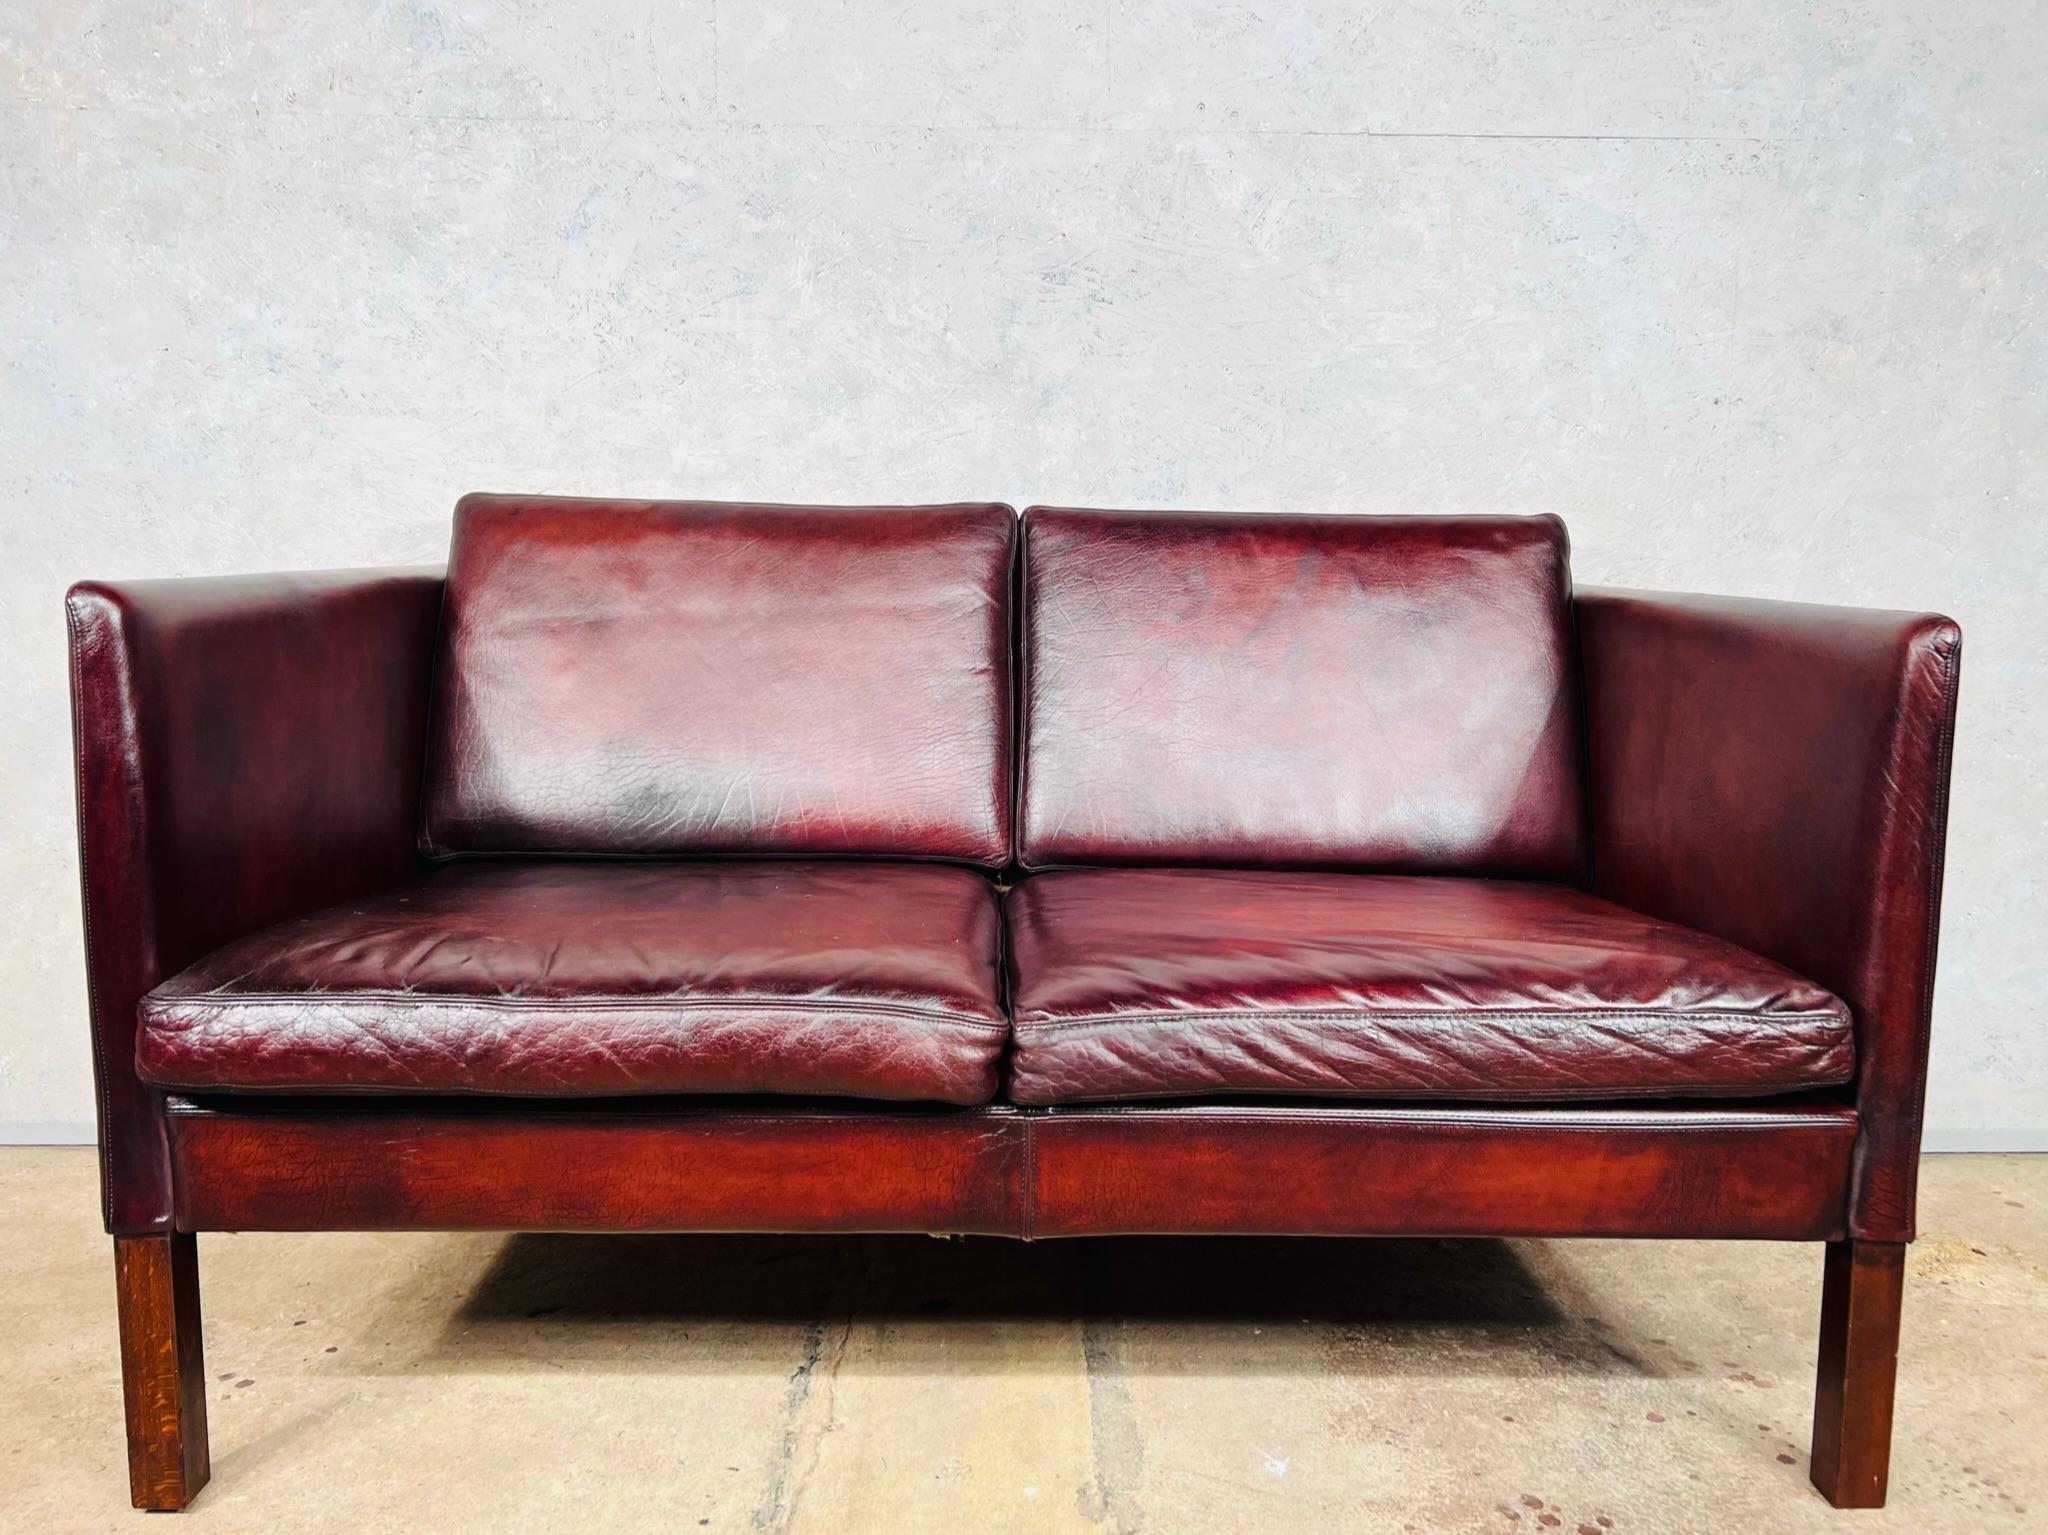 Elegant Vintage Danish 1970s Midcentury Chestnut Two Seater Leather Sofa In Good Condition For Sale In Lewes, GB